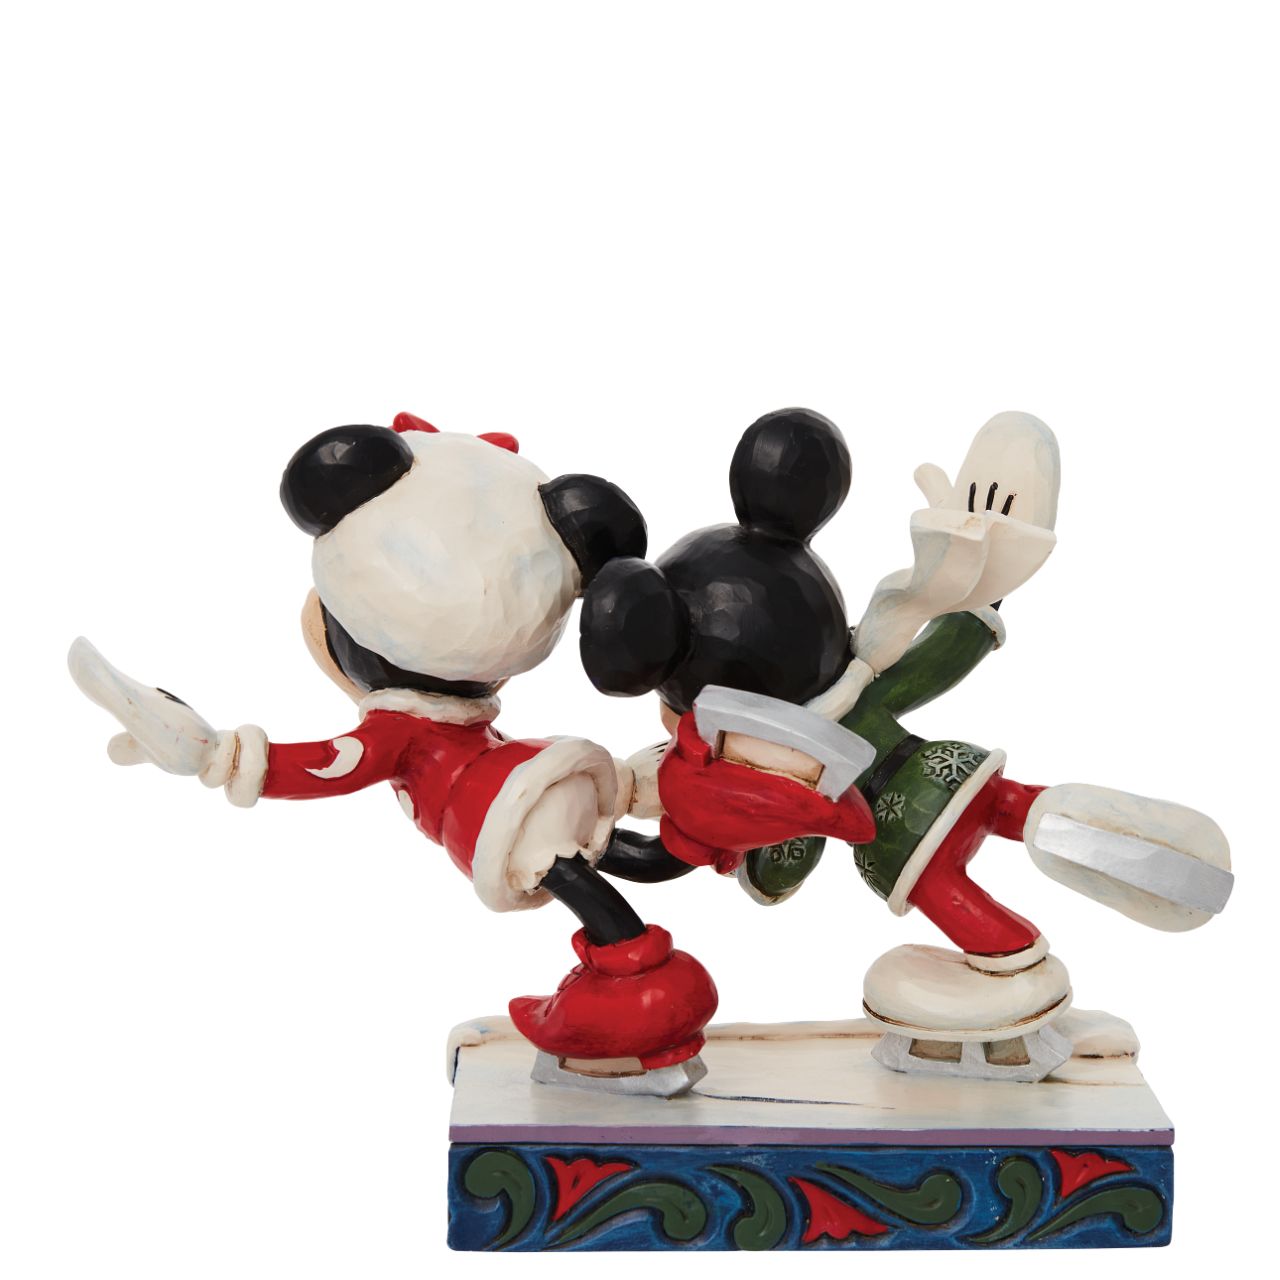 Jim Shore Mickey and Minnie Ice Skating Figurine  Skating together, Mickey and Minnie Mouse warm the winter with their timeless love story. Hand in hand the pair enjoy each other's company in stunning snowflake tunics in this Jim Shore creation.